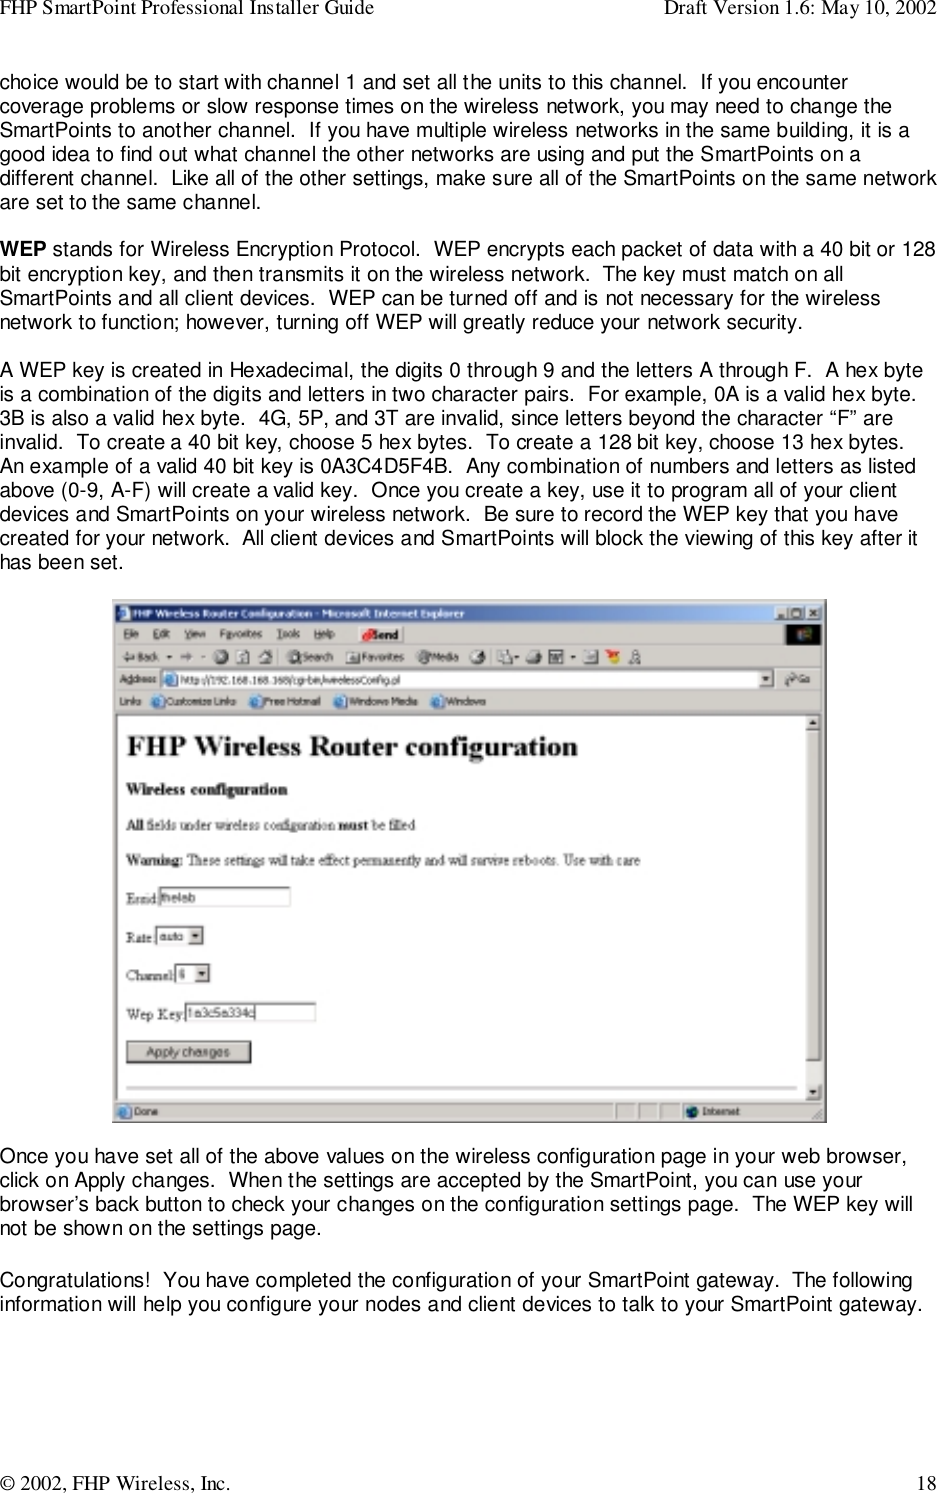 FHP SmartPoint Professional Installer Guide Draft Version 1.6: May 10, 2002© 2002, FHP Wireless, Inc. 18choice would be to start with channel 1 and set all the units to this channel.  If you encountercoverage problems or slow response times on the wireless network, you may need to change theSmartPoints to another channel.  If you have multiple wireless networks in the same building, it is agood idea to find out what channel the other networks are using and put the SmartPoints on adifferent channel.  Like all of the other settings, make sure all of the SmartPoints on the same networkare set to the same channel.WEP stands for Wireless Encryption Protocol.  WEP encrypts each packet of data with a 40 bit or 128bit encryption key, and then transmits it on the wireless network.  The key must match on allSmartPoints and all client devices.  WEP can be turned off and is not necessary for the wirelessnetwork to function; however, turning off WEP will greatly reduce your network security.A WEP key is created in Hexadecimal, the digits 0 through 9 and the letters A through F.  A hex byteis a combination of the digits and letters in two character pairs.  For example, 0A is a valid hex byte.3B is also a valid hex byte.  4G, 5P, and 3T are invalid, since letters beyond the character “F” areinvalid.  To create a 40 bit key, choose 5 hex bytes.  To create a 128 bit key, choose 13 hex bytes.An example of a valid 40 bit key is 0A3C4D5F4B.  Any combination of numbers and letters as listedabove (0-9, A-F) will create a valid key.  Once you create a key, use it to program all of your clientdevices and SmartPoints on your wireless network.  Be sure to record the WEP key that you havecreated for your network.  All client devices and SmartPoints will block the viewing of this key after ithas been set.Once you have set all of the above values on the wireless configuration page in your web browser,click on Apply changes.  When the settings are accepted by the SmartPoint, you can use yourbrowser’s back button to check your changes on the configuration settings page.  The WEP key willnot be shown on the settings page.Congratulations!  You have completed the configuration of your SmartPoint gateway.  The followinginformation will help you configure your nodes and client devices to talk to your SmartPoint gateway.